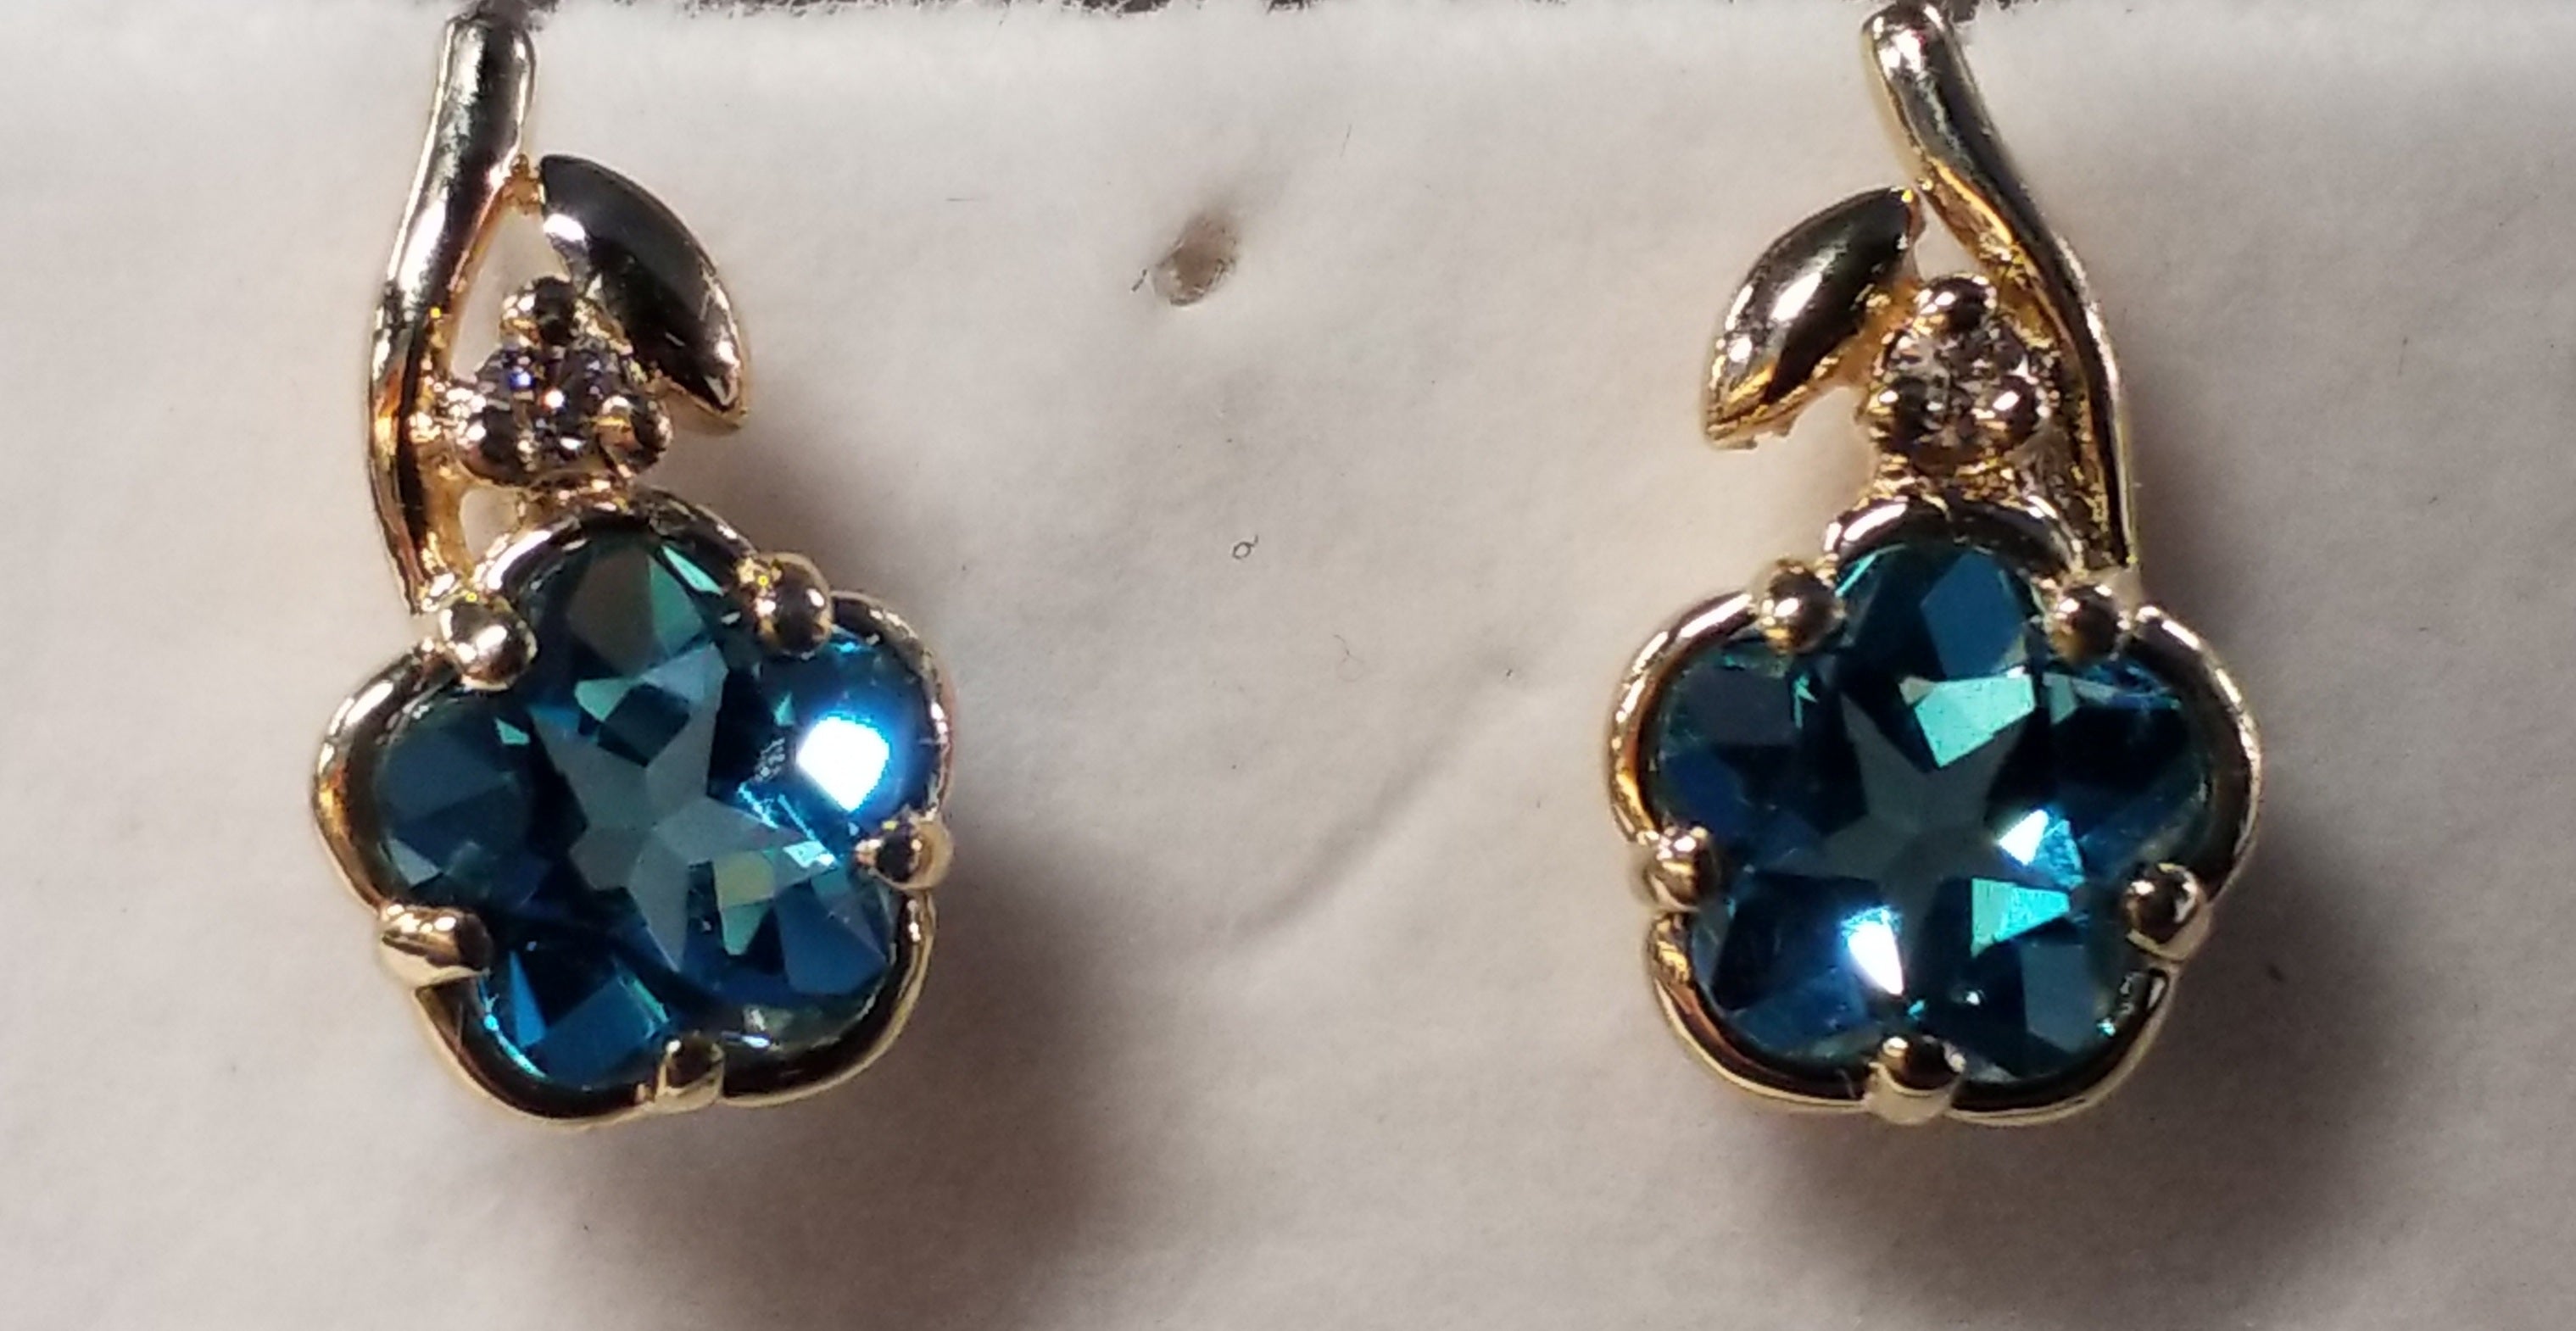 Floral Cut Blue Topaz Earrings with Diamond Accents - Flowers - Matching Pendant available